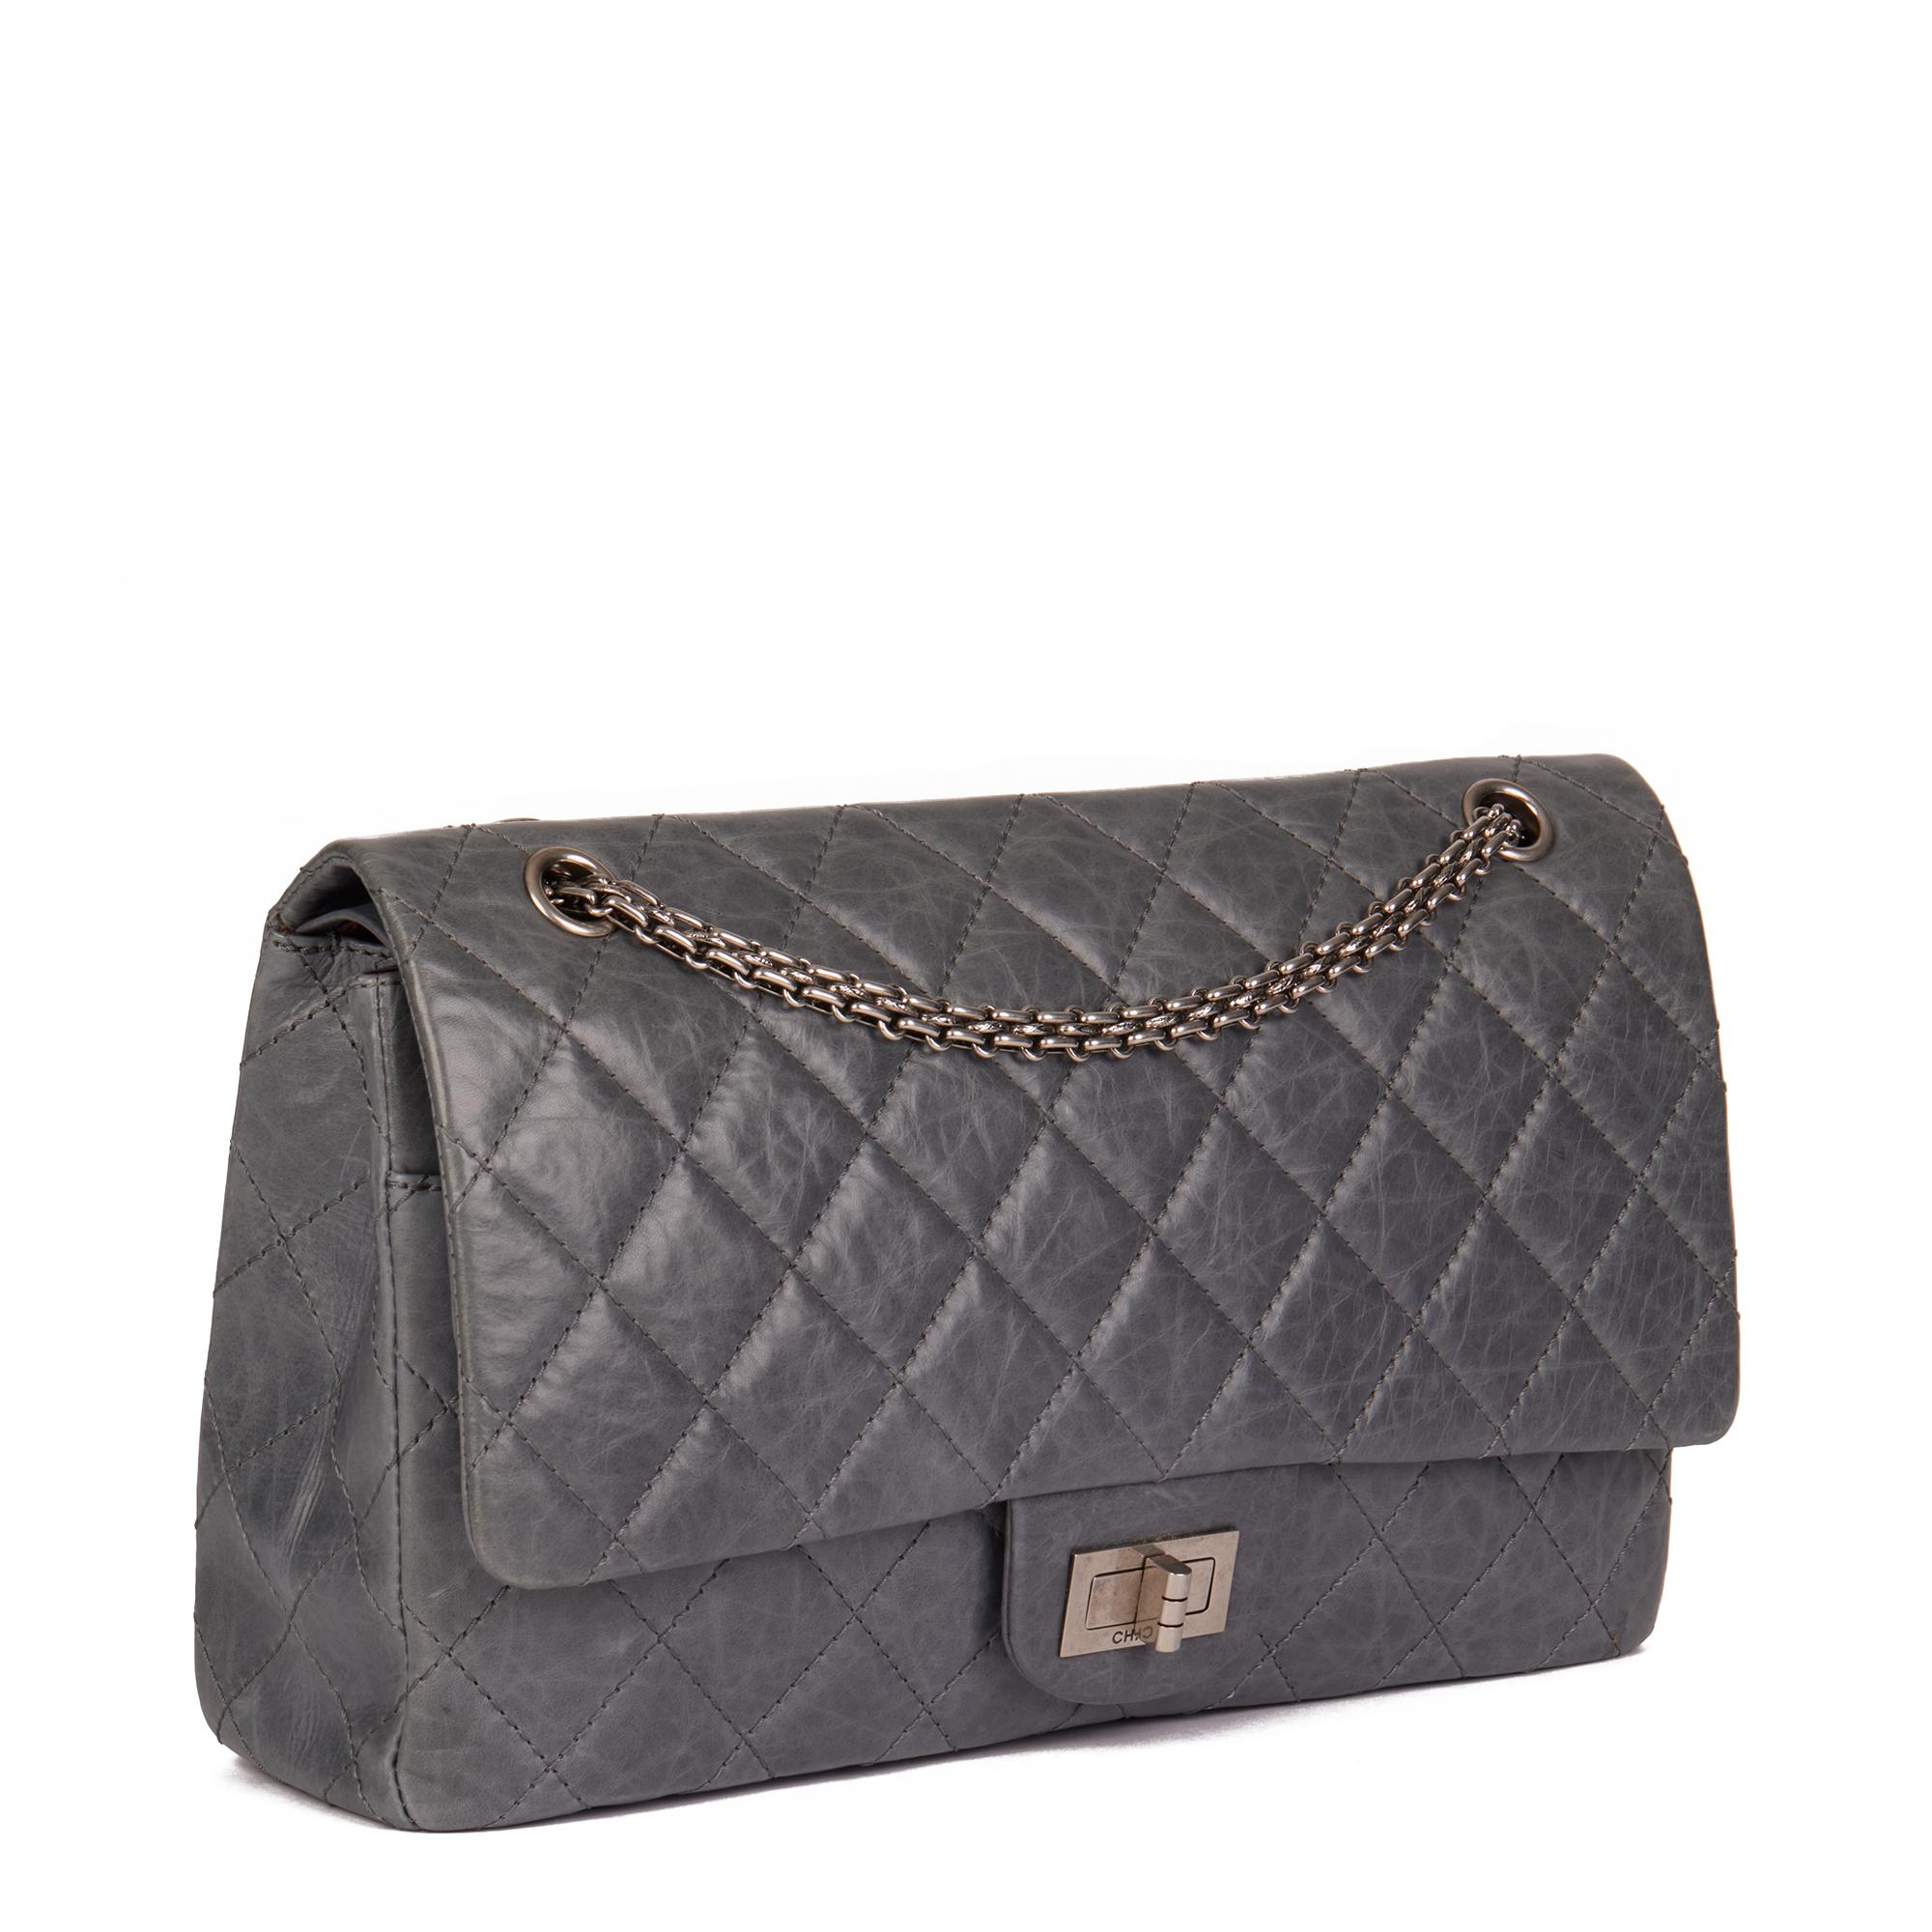 CHANEL
Grey Quilted Aged Calfskin Leather 2005 50th Anniversary Edition 227 2.55 Reissue Double Flap Bag

Serial Number: 10386073
Age (Circa): 2005
Accompanied By: Chanel Dust Bag, Authenticity Card
Authenticity Details: Authenticity Card, Serial